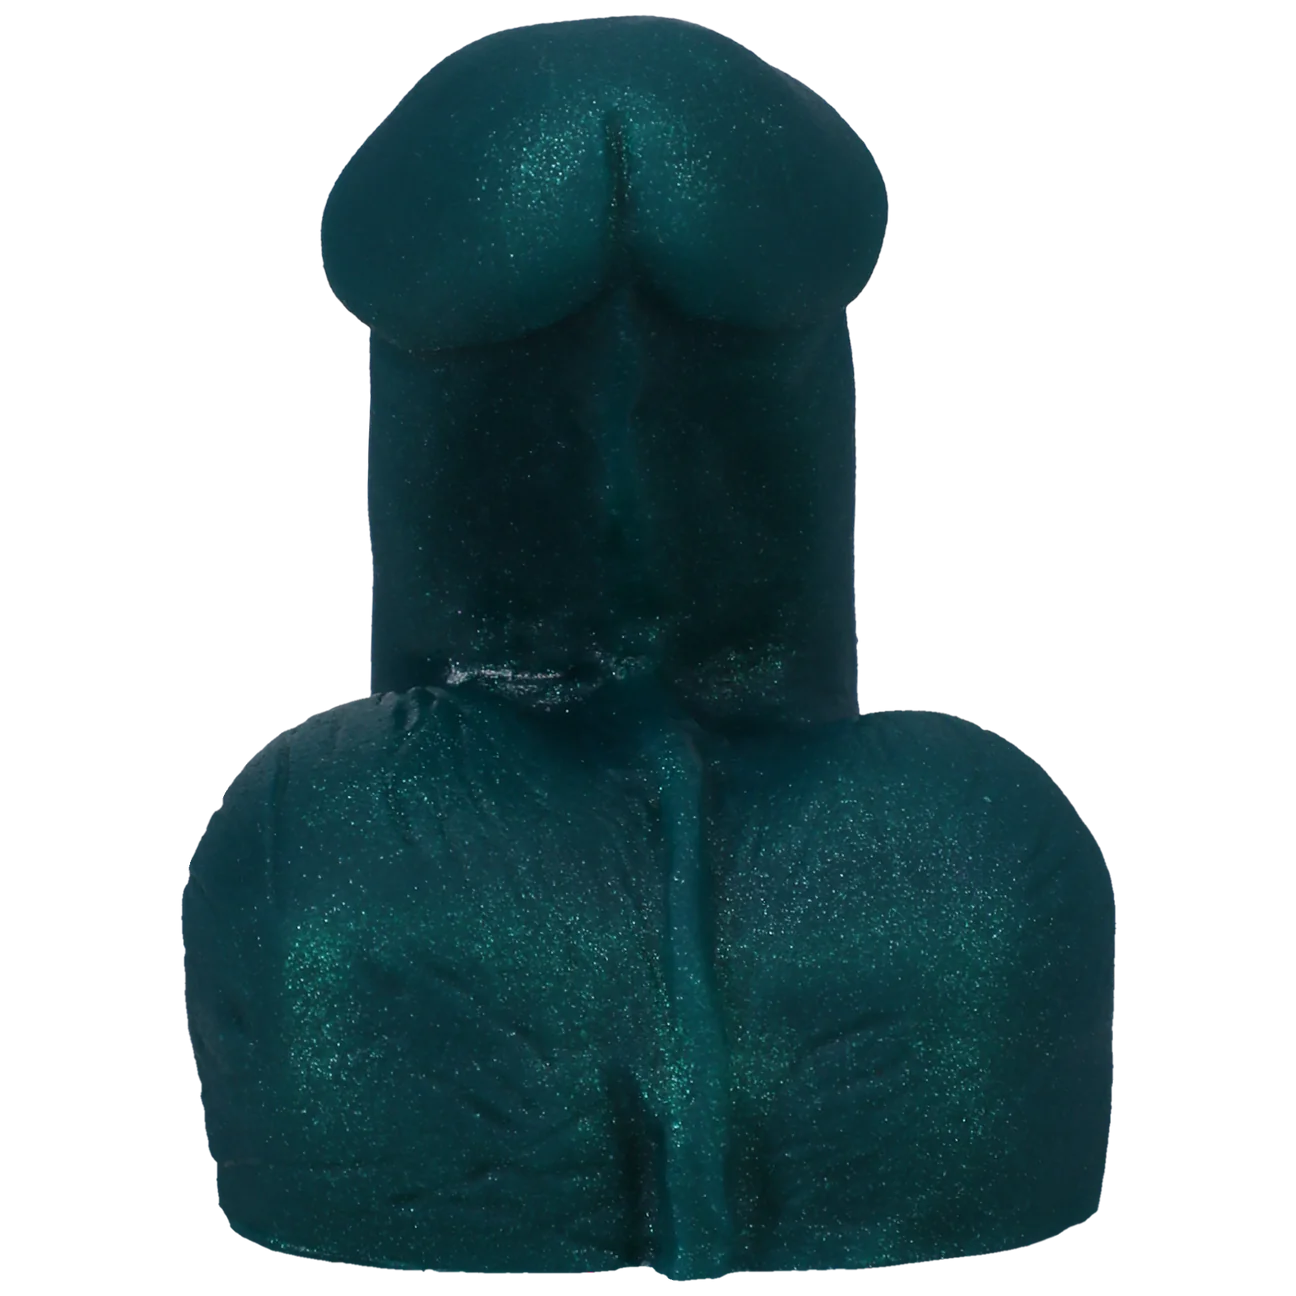 Tantus On The Go Silicone Packer Super Soft